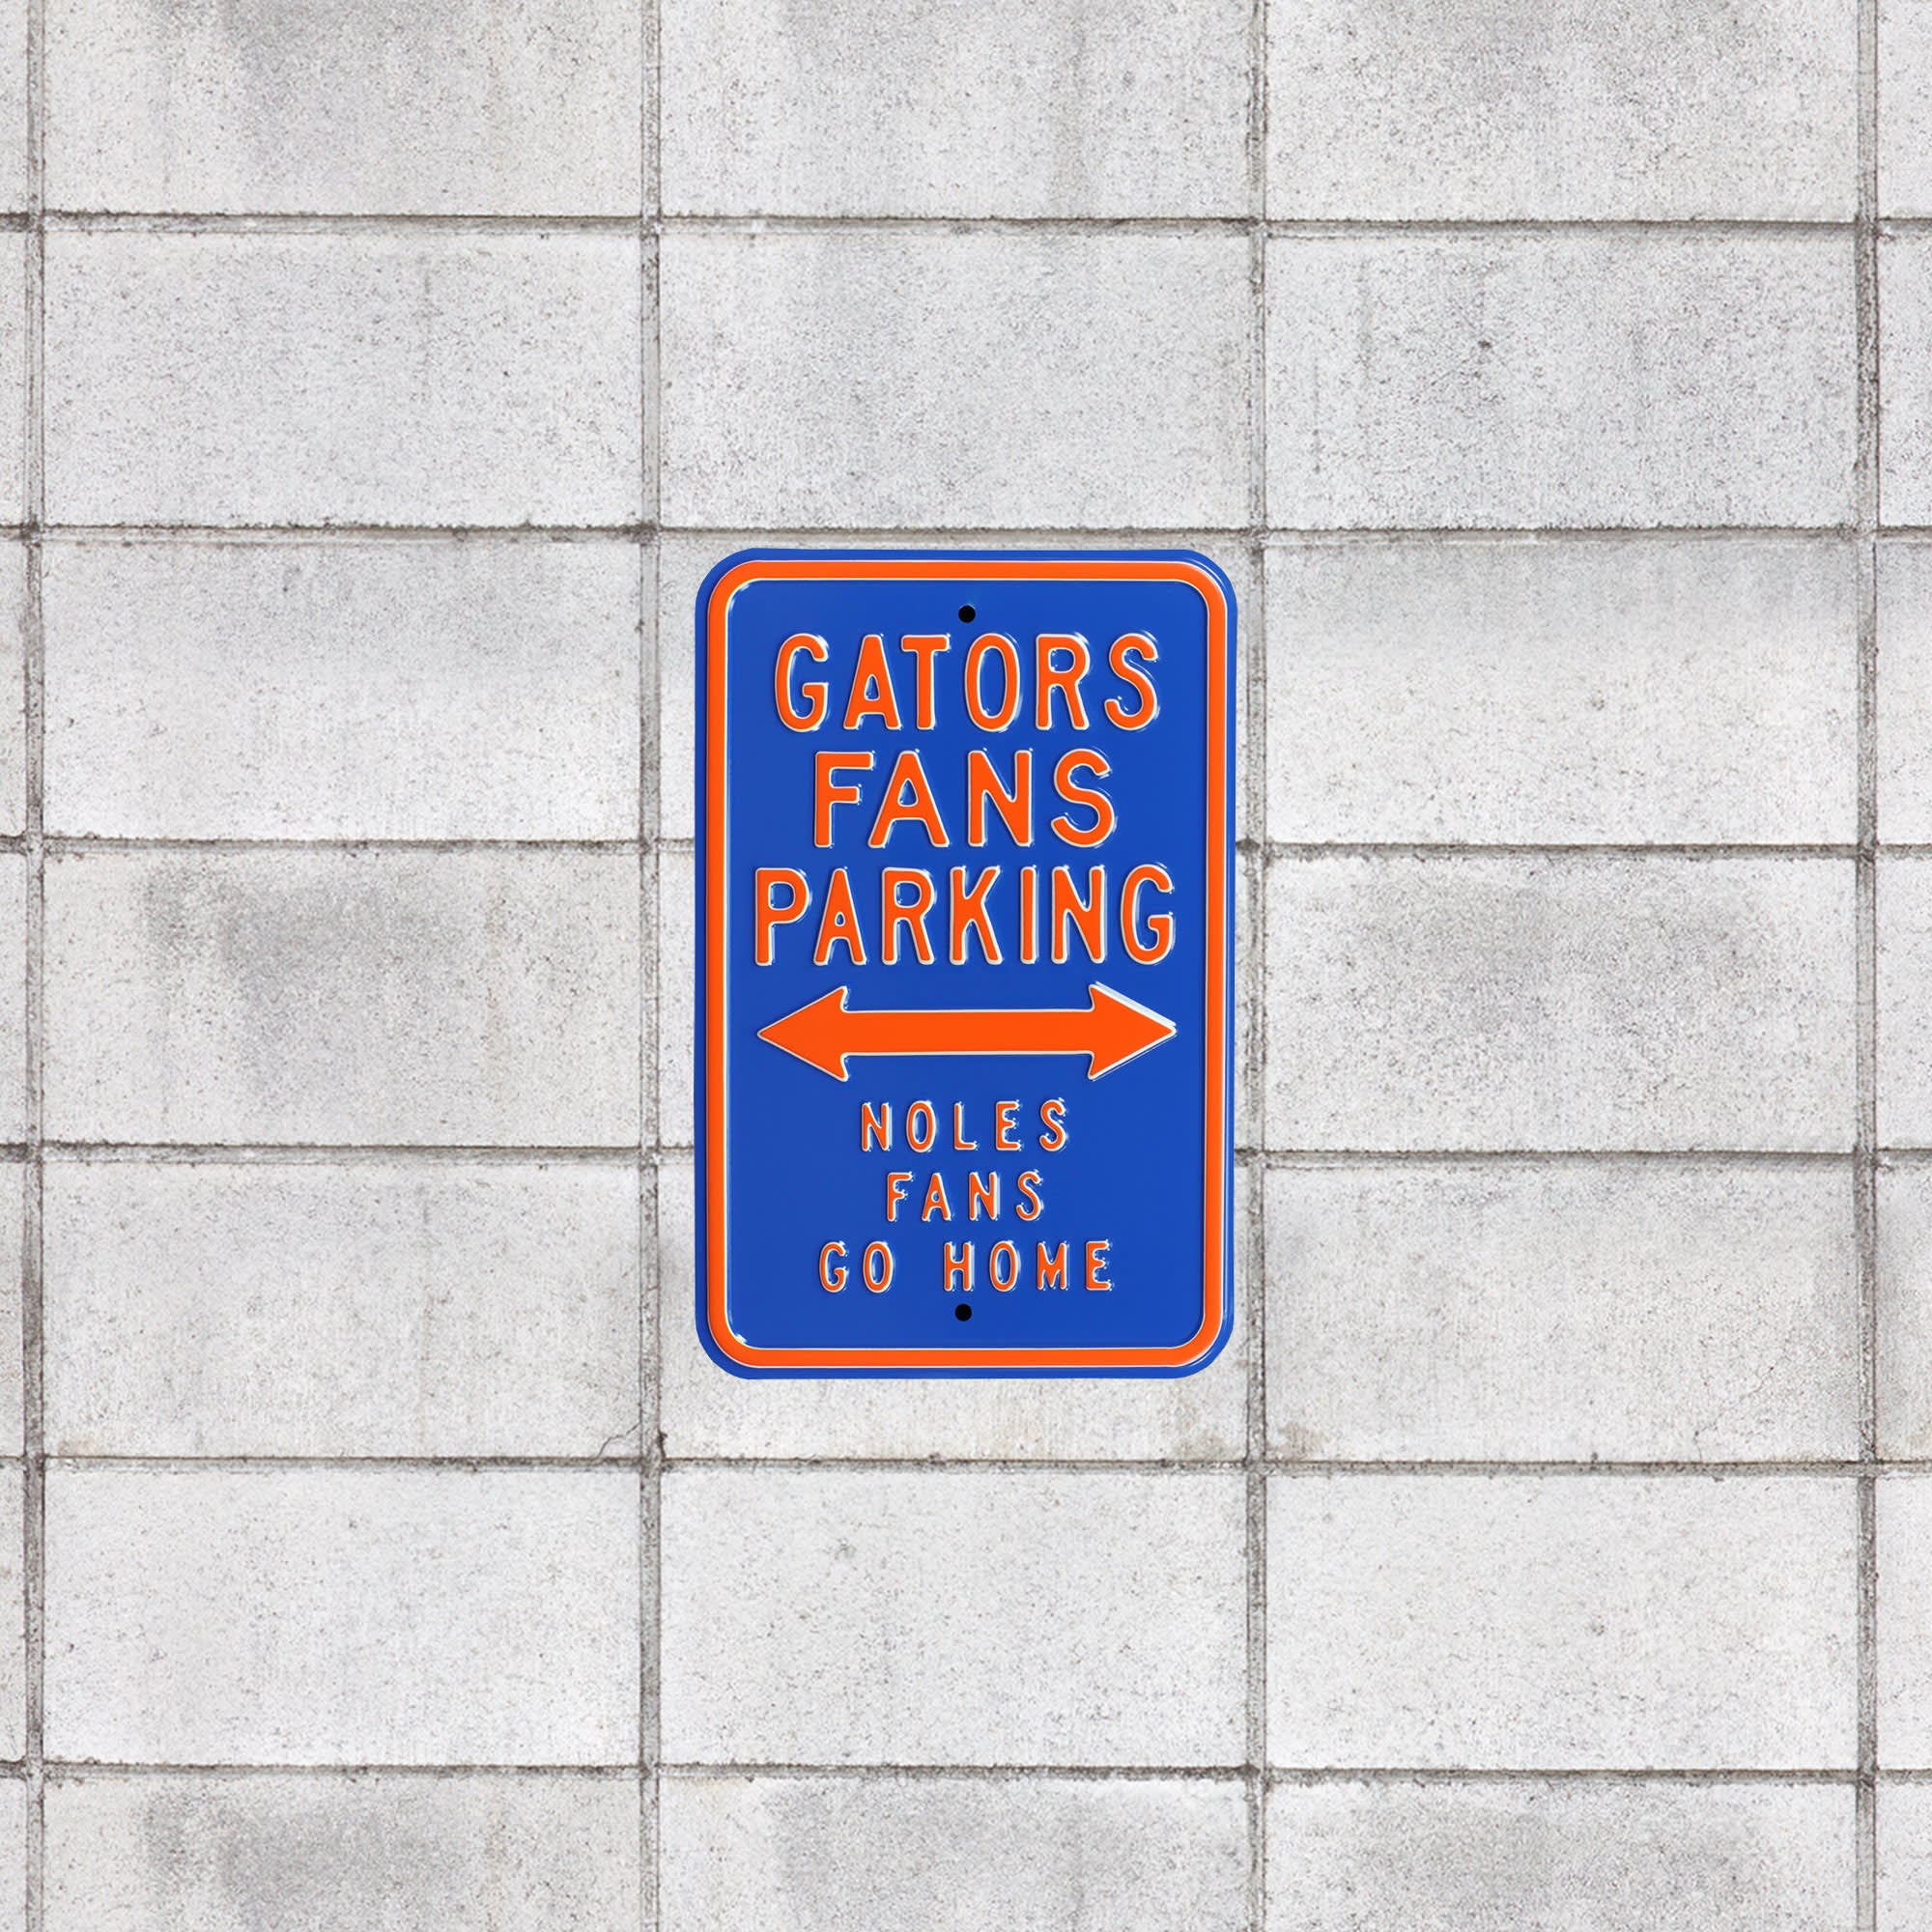 Florida Gators: Noles Go Home Parking - Officially Licensed Metal Street Sign 18.0"W x 12.0"H by Fathead | 100% Steel